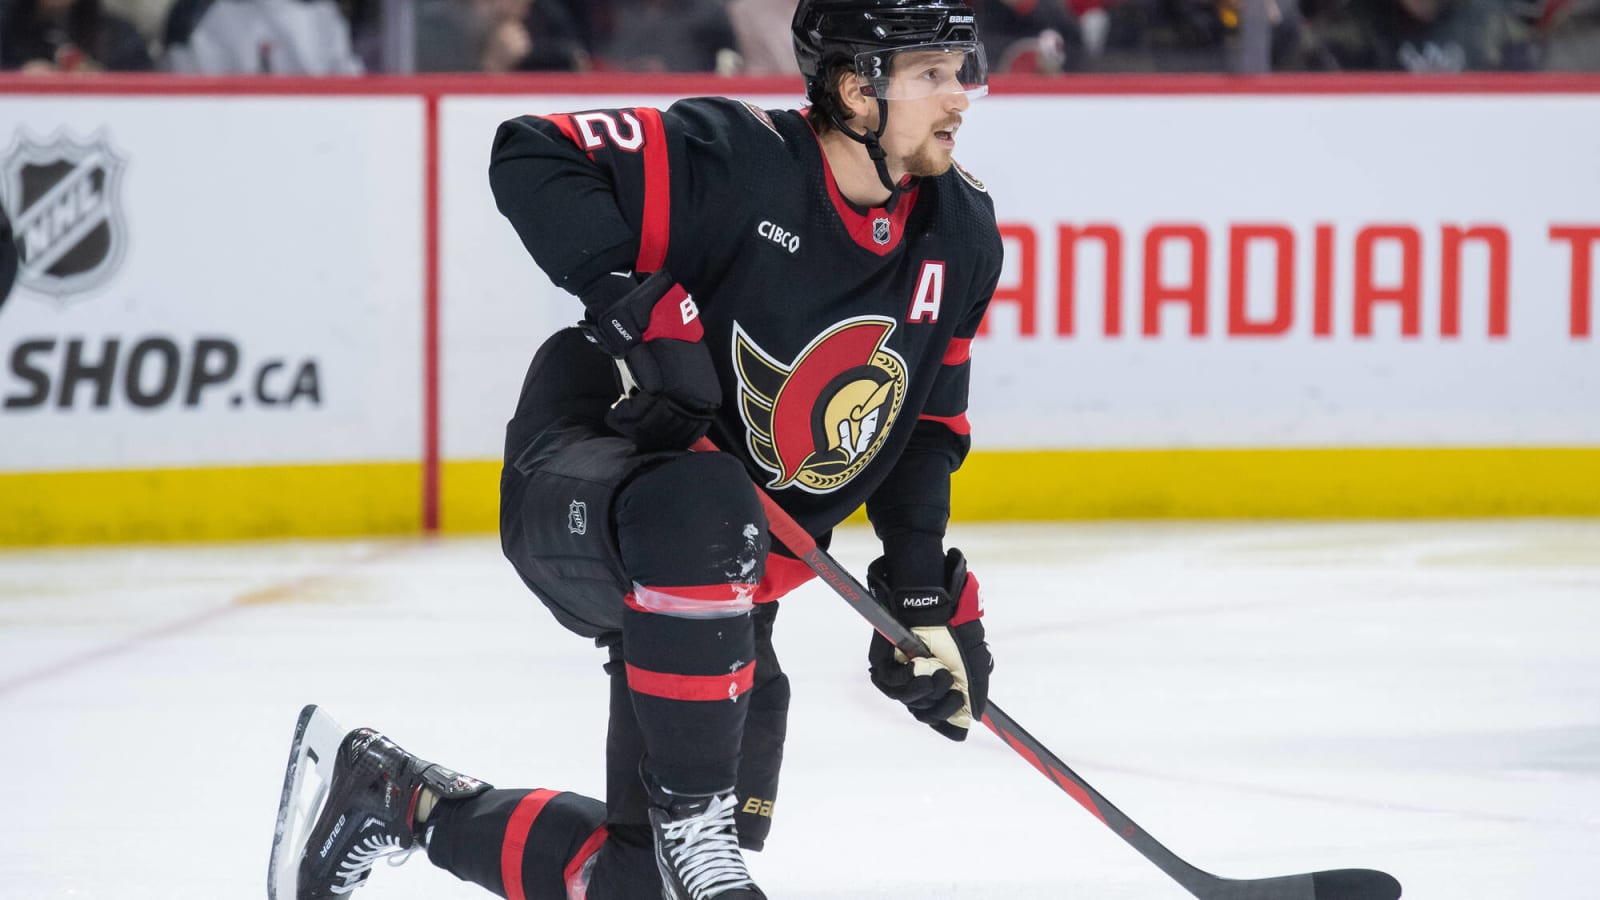 Senators Will Have to Choose Between Chabot and Chychrun